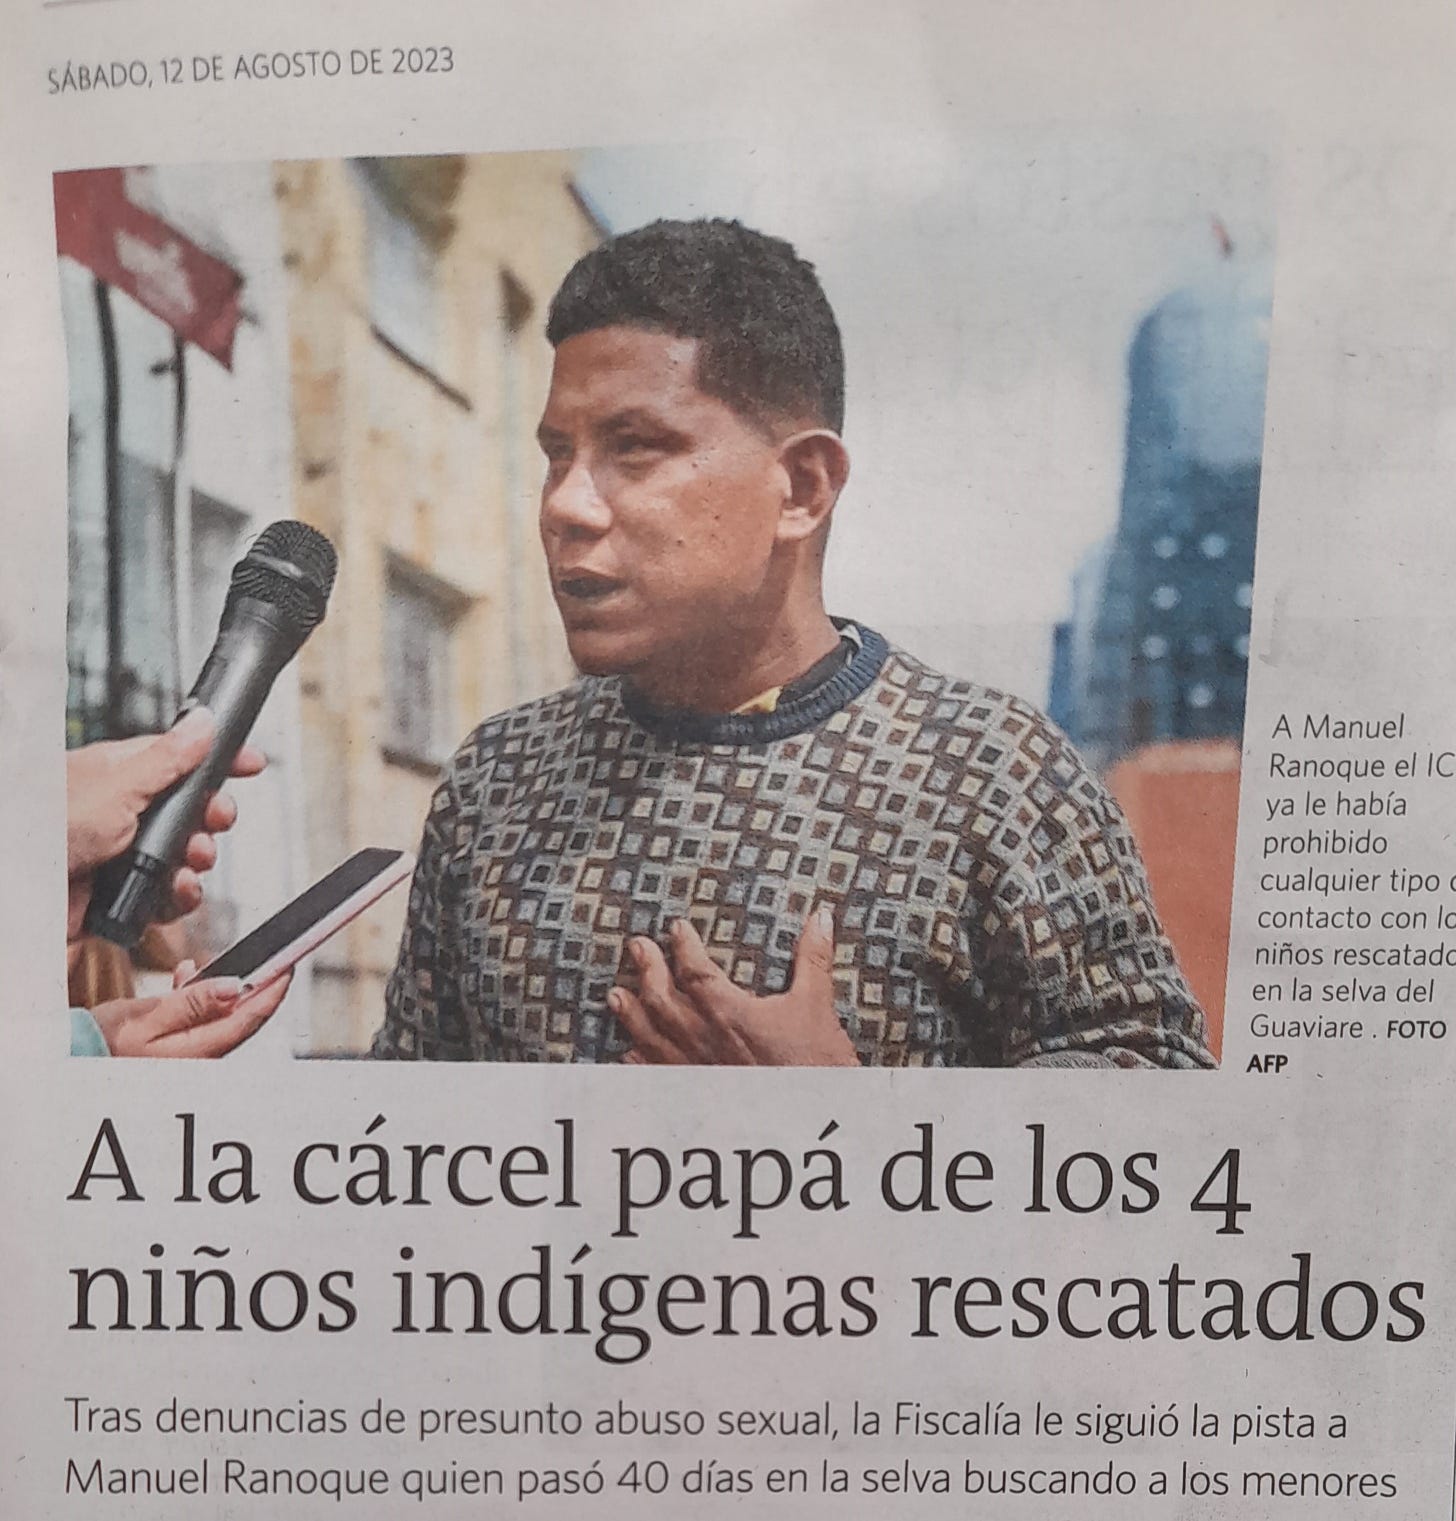 El Colombiano article on the man arrested for sexual assault, as discussed later in this piece.